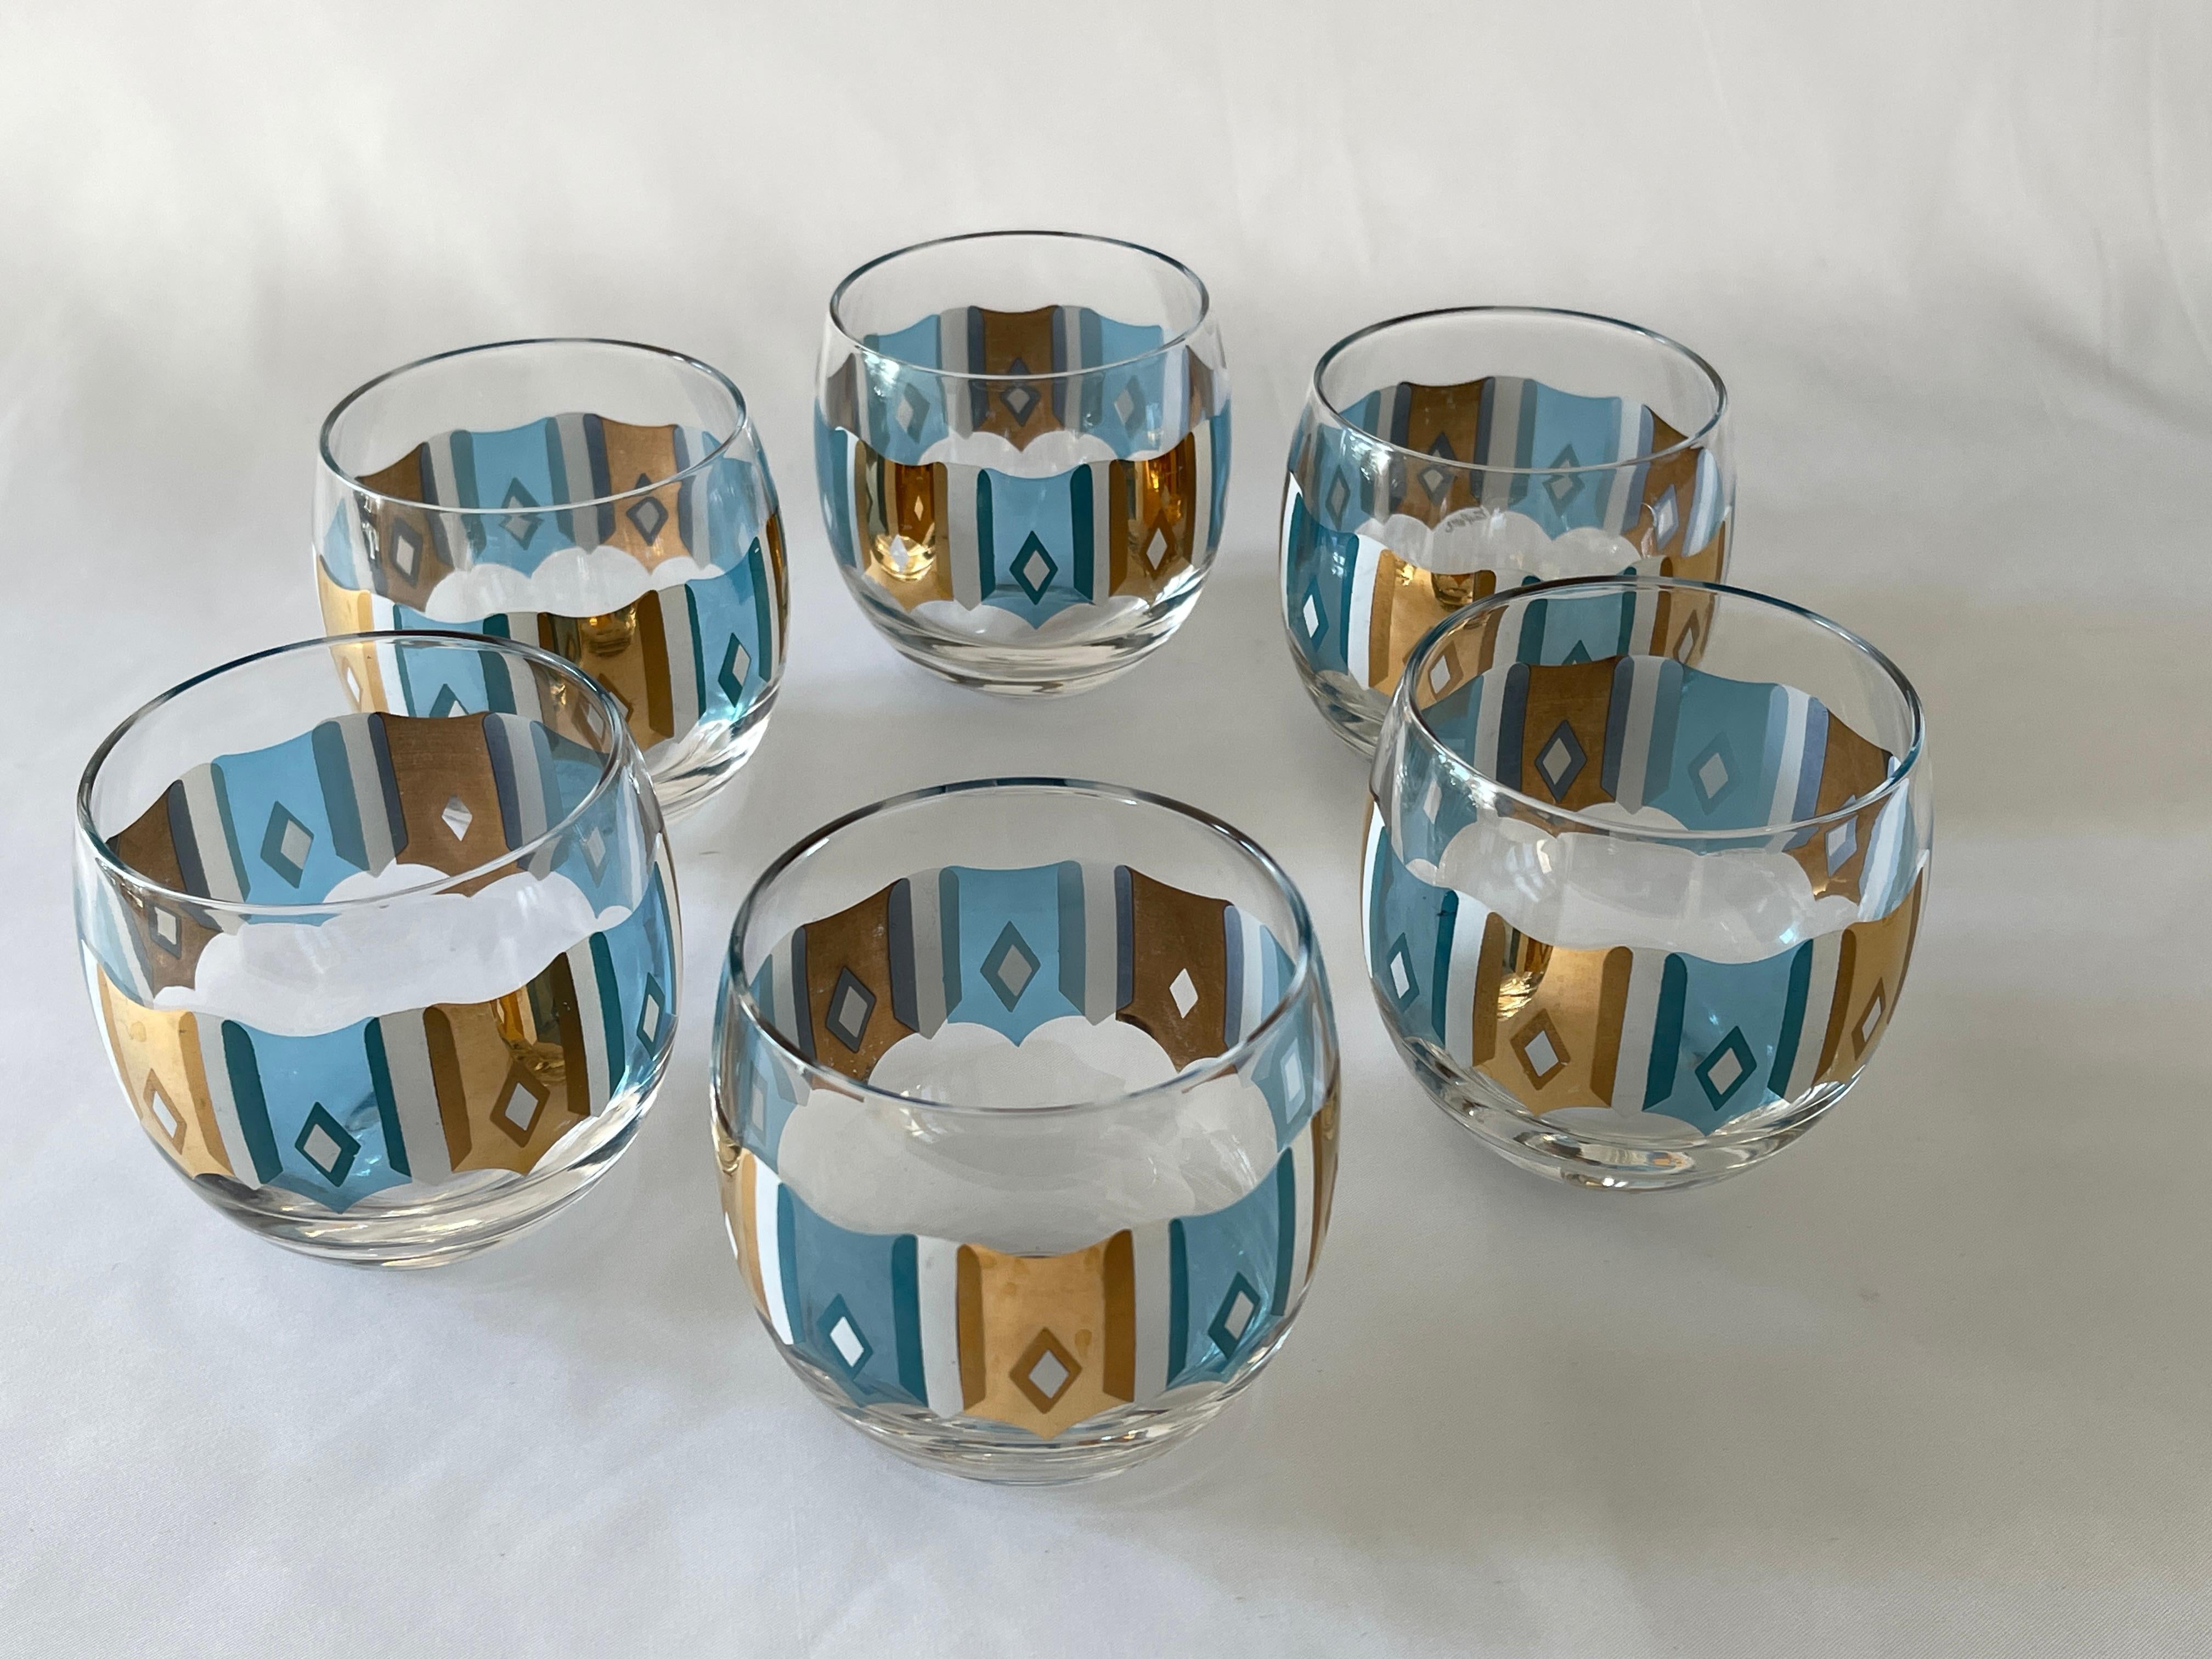 Set of 6 Culver Ltd. 1960's round cocktail glasses with turquoise, white, and 22K gold  decoration. Signed Culver on each glass. 